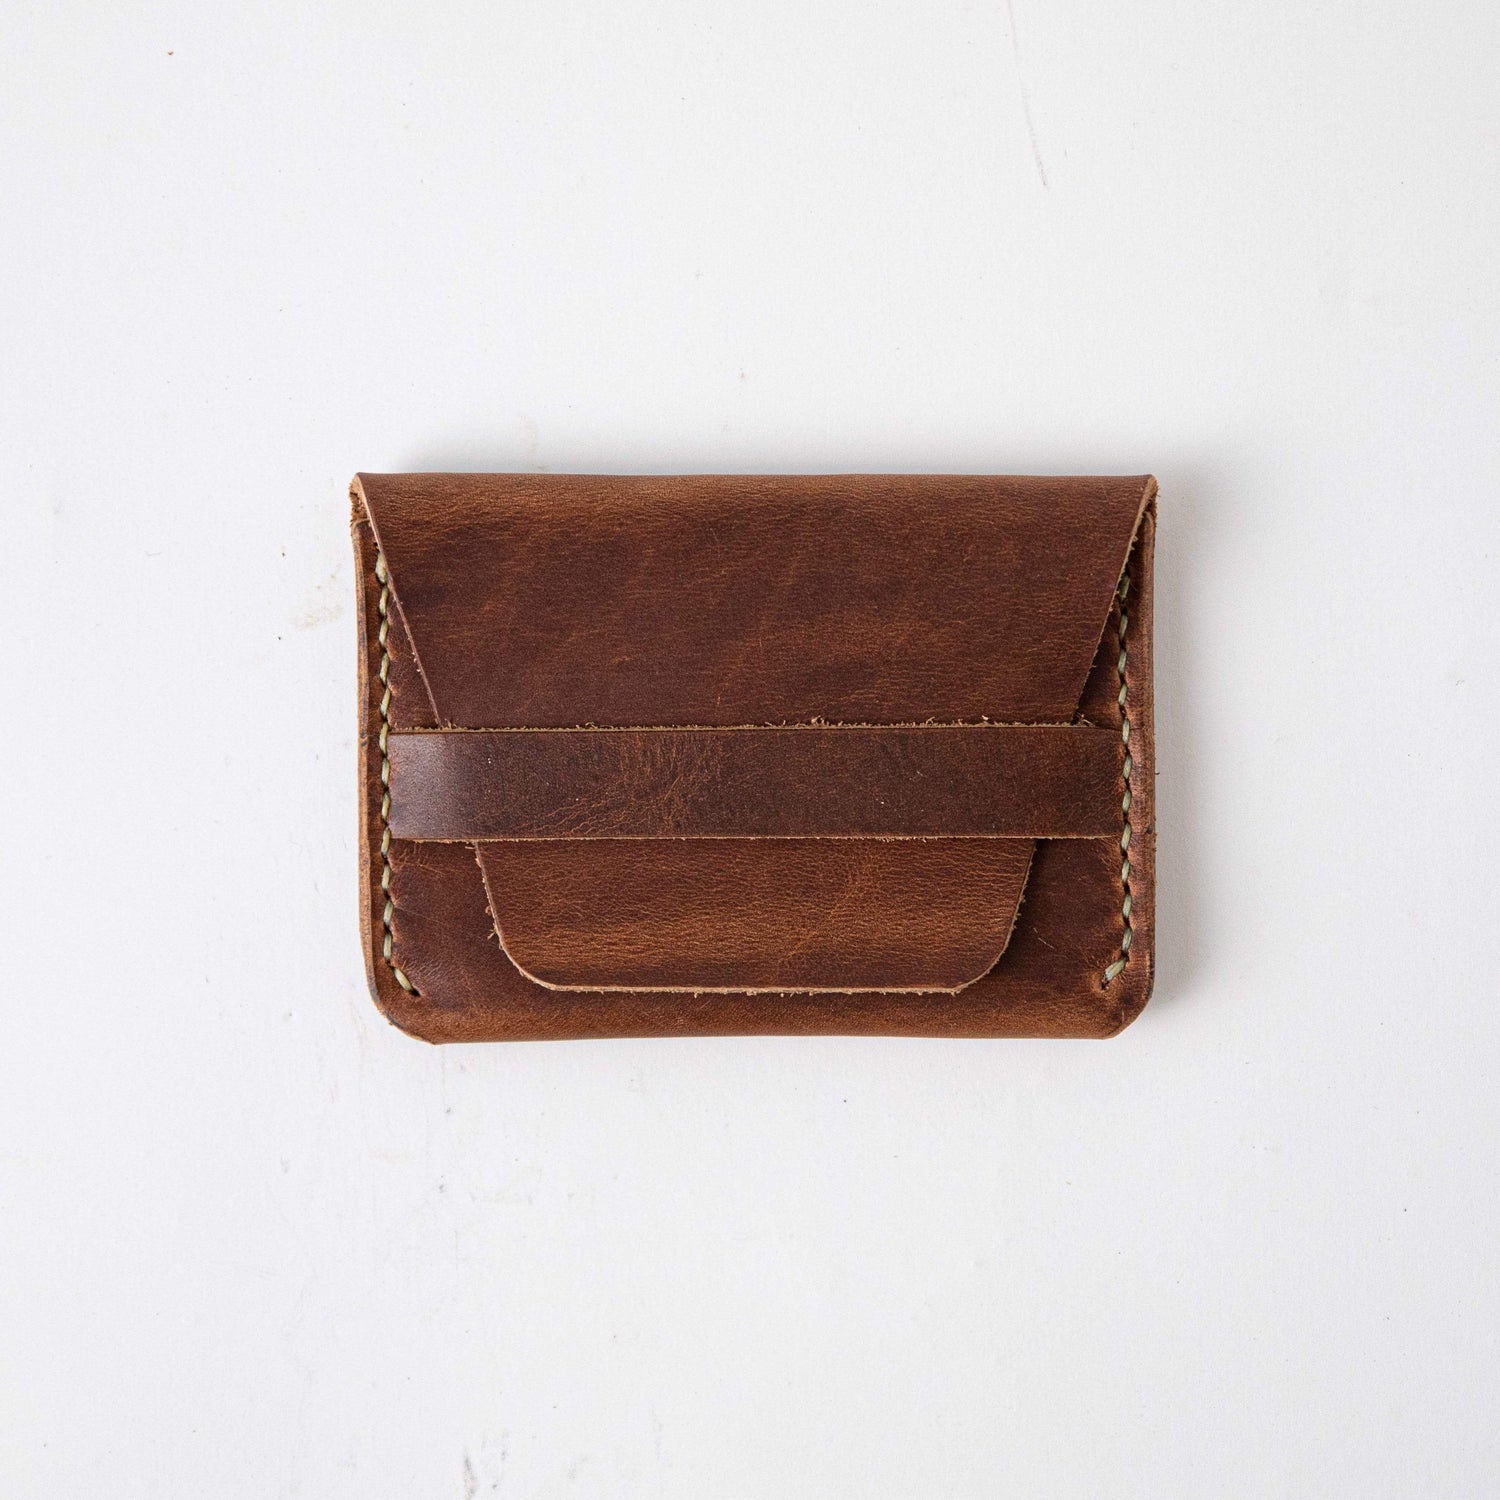 Handmade Leather Goods Made in the USA